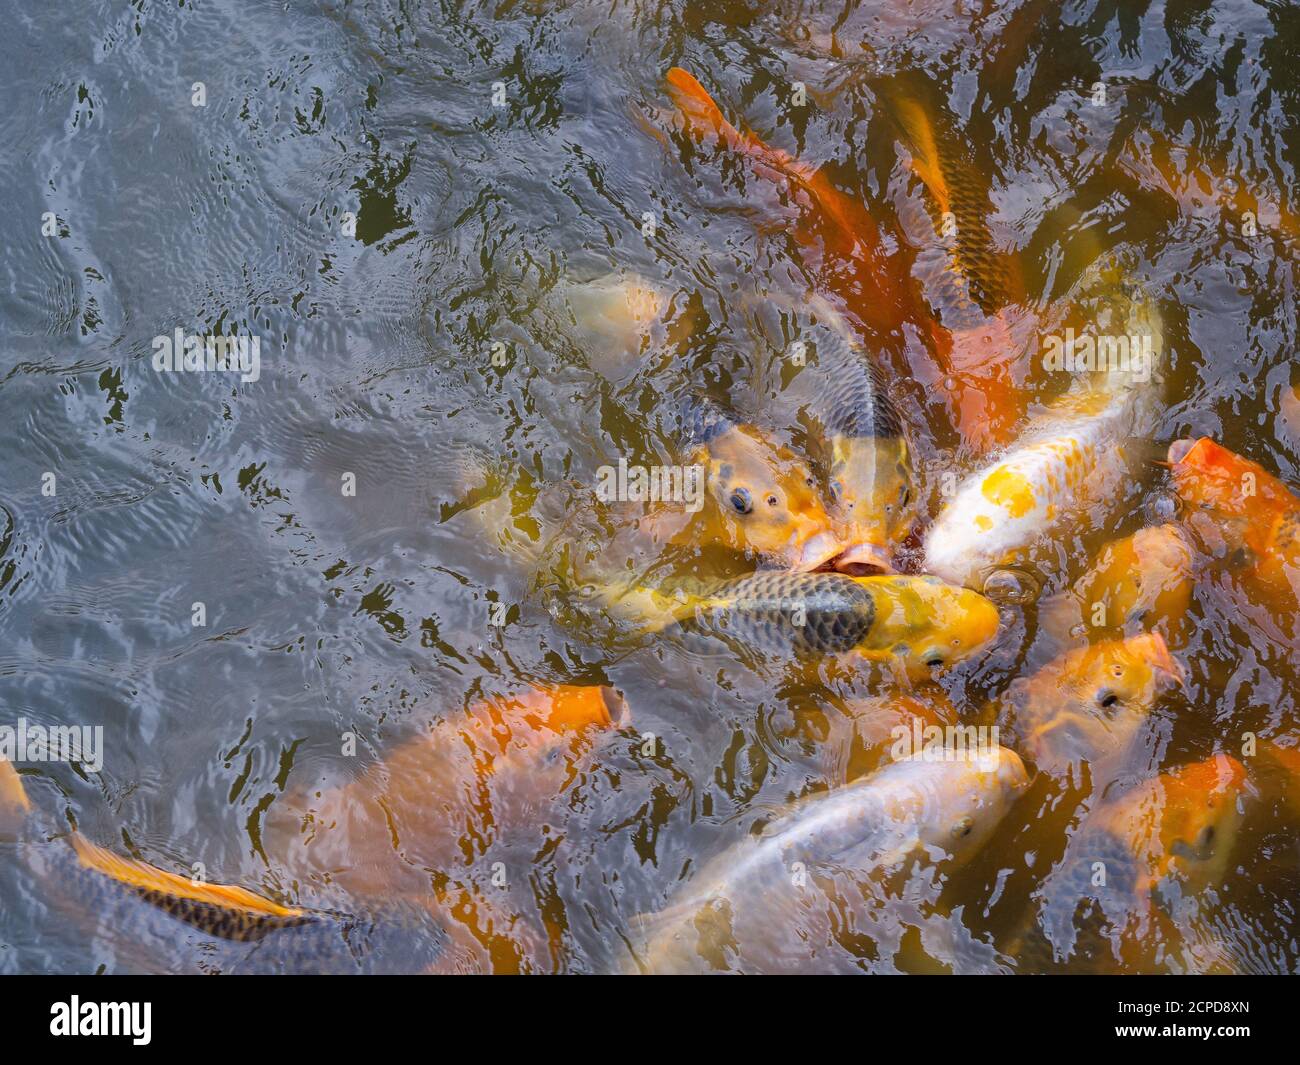 Tilapia and Koi fish or fancy carp fish swimming waiting for food in the pond. Stock Photo